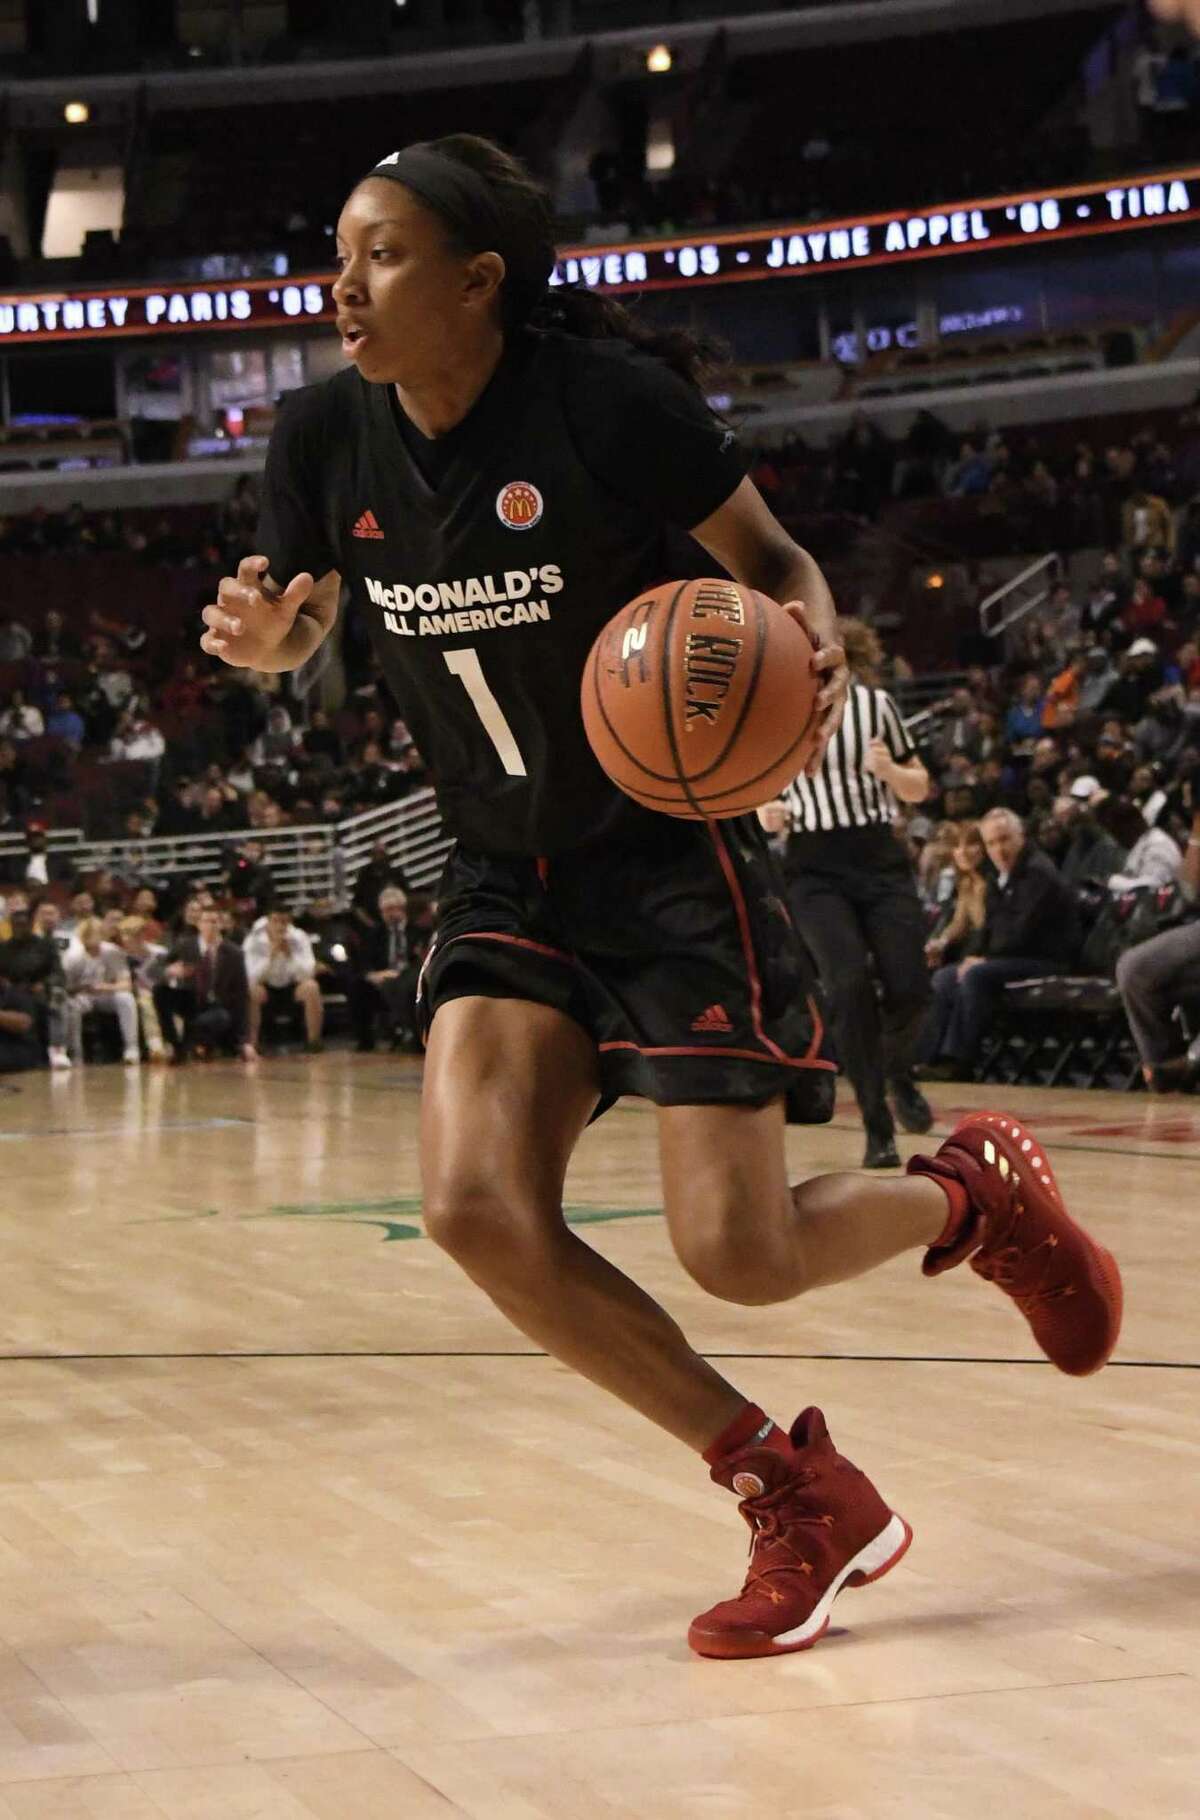 Mikayla Coombs, a guard from Georgia, is one part of a UConn recruiting class that features four of the top 37 recruits in espnW’s Class of 2017 rankings.